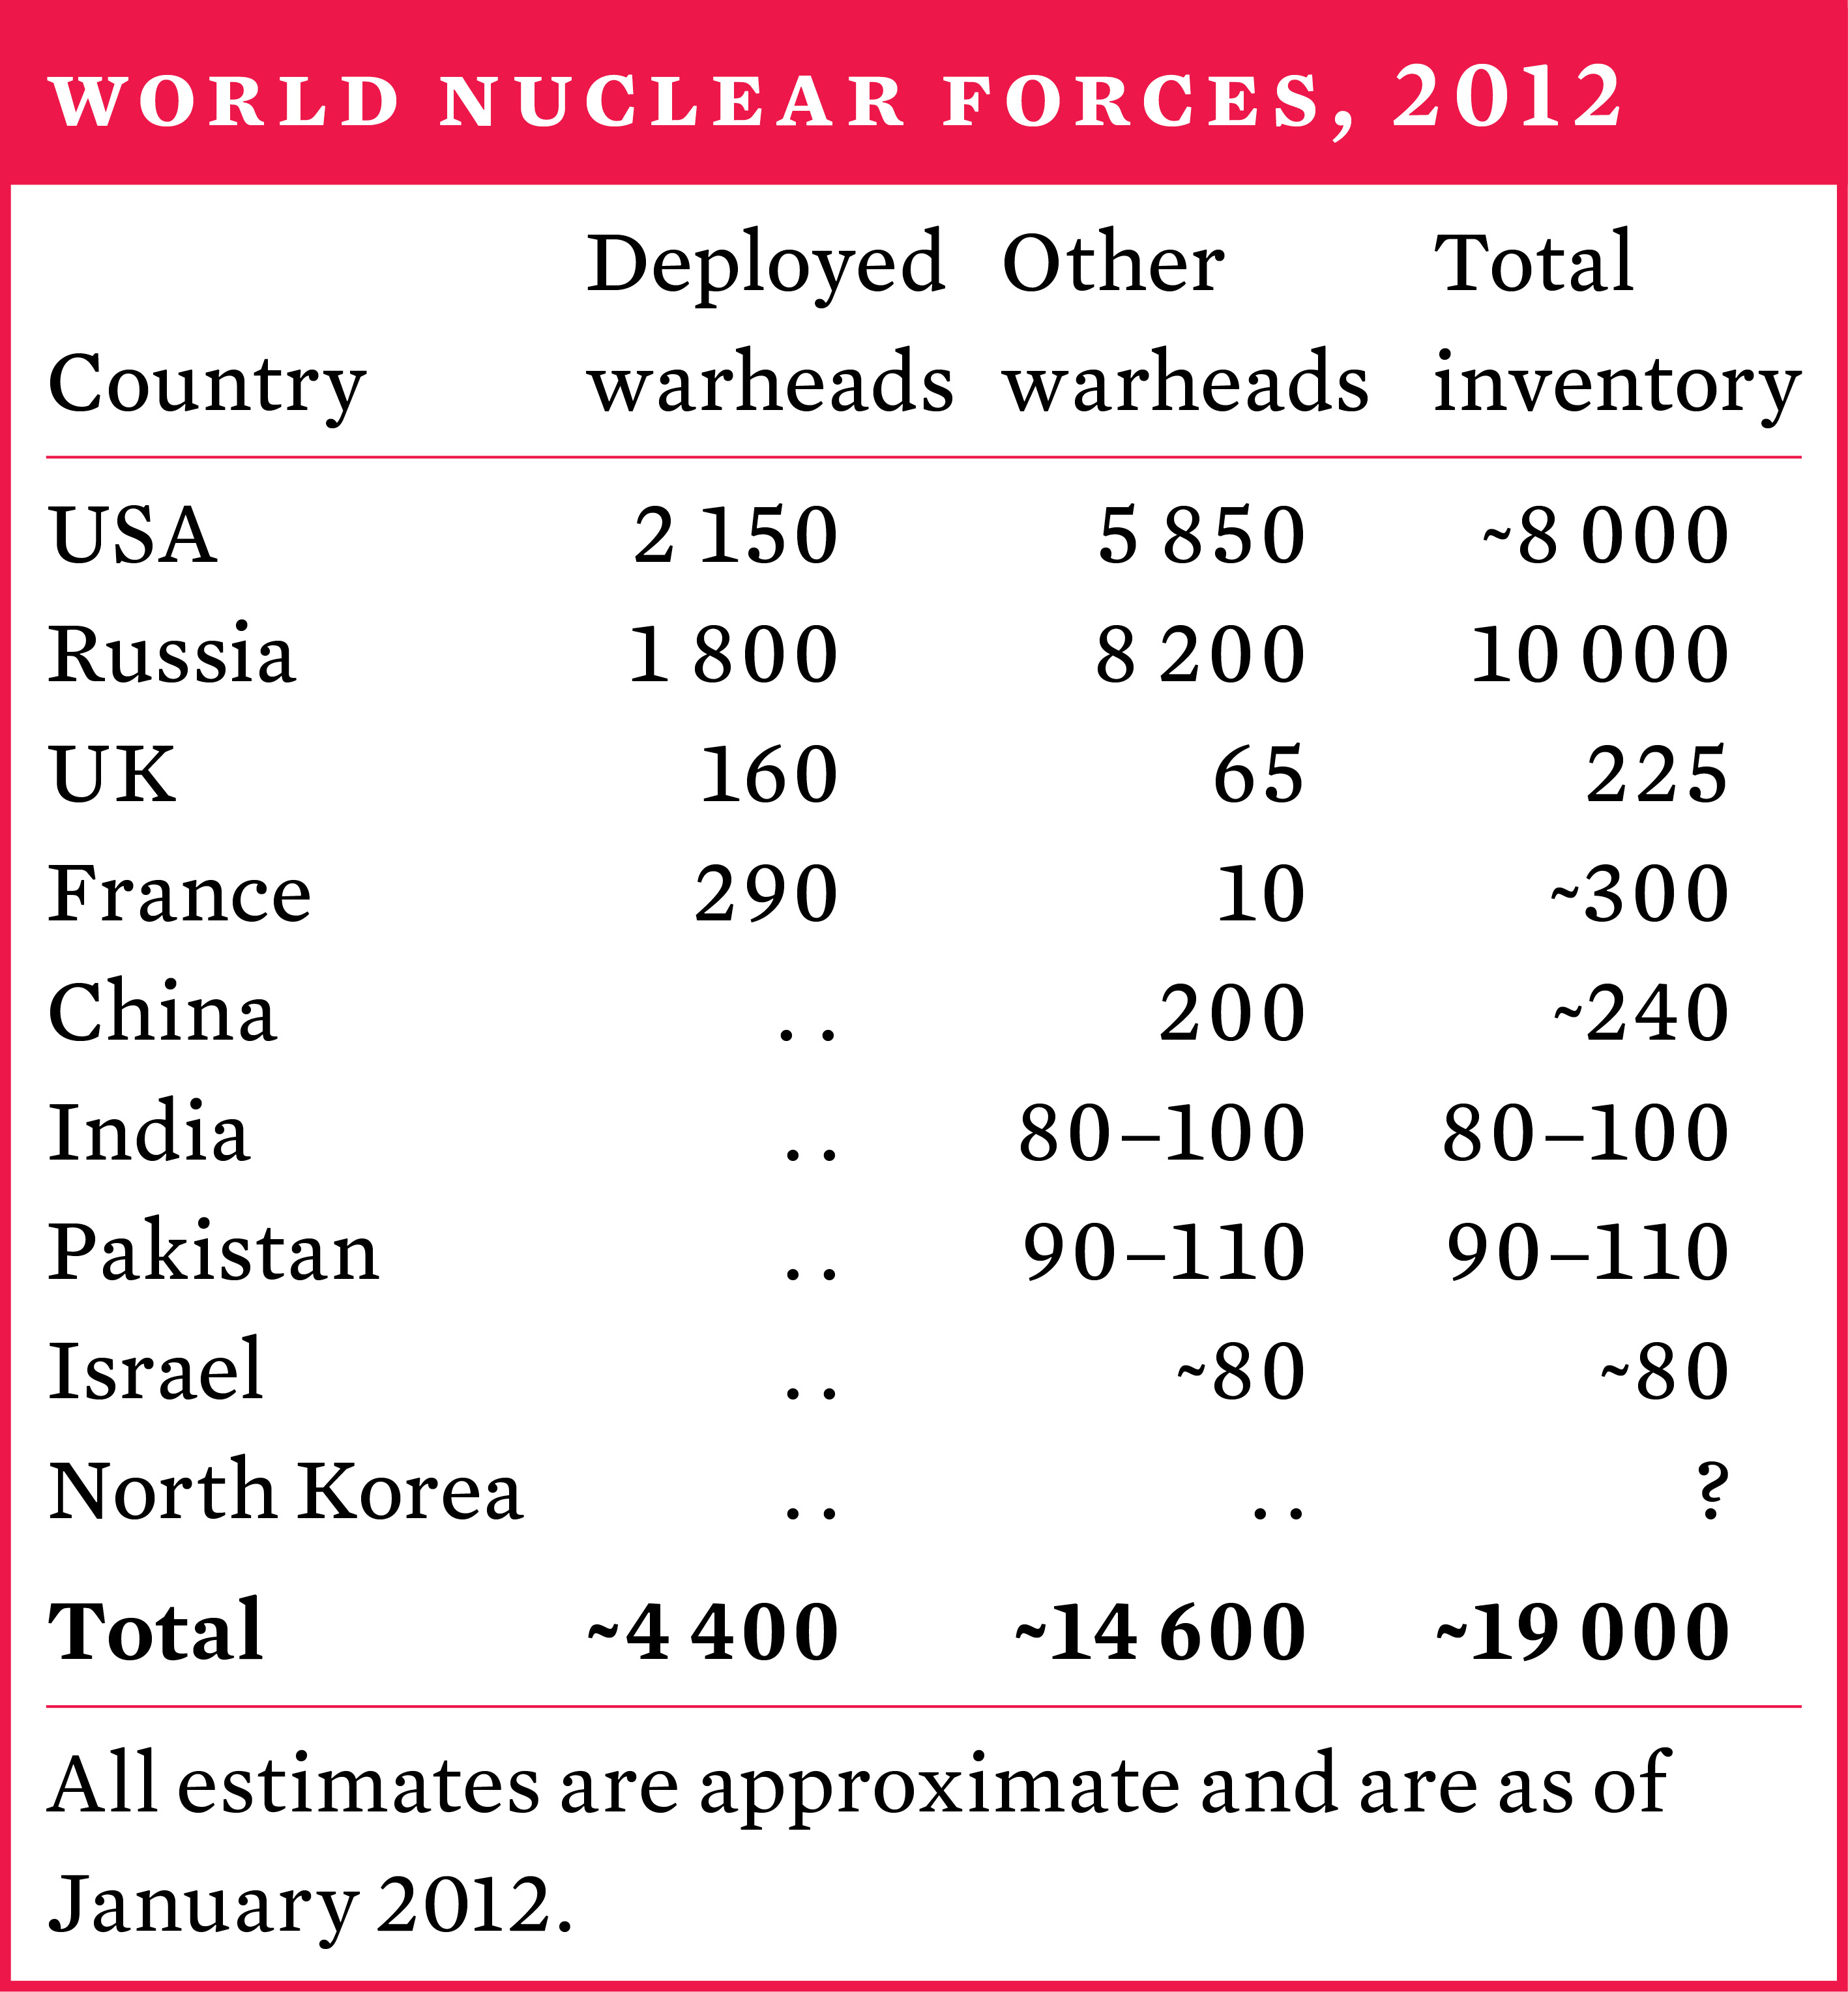 World nuclear forces, 2012